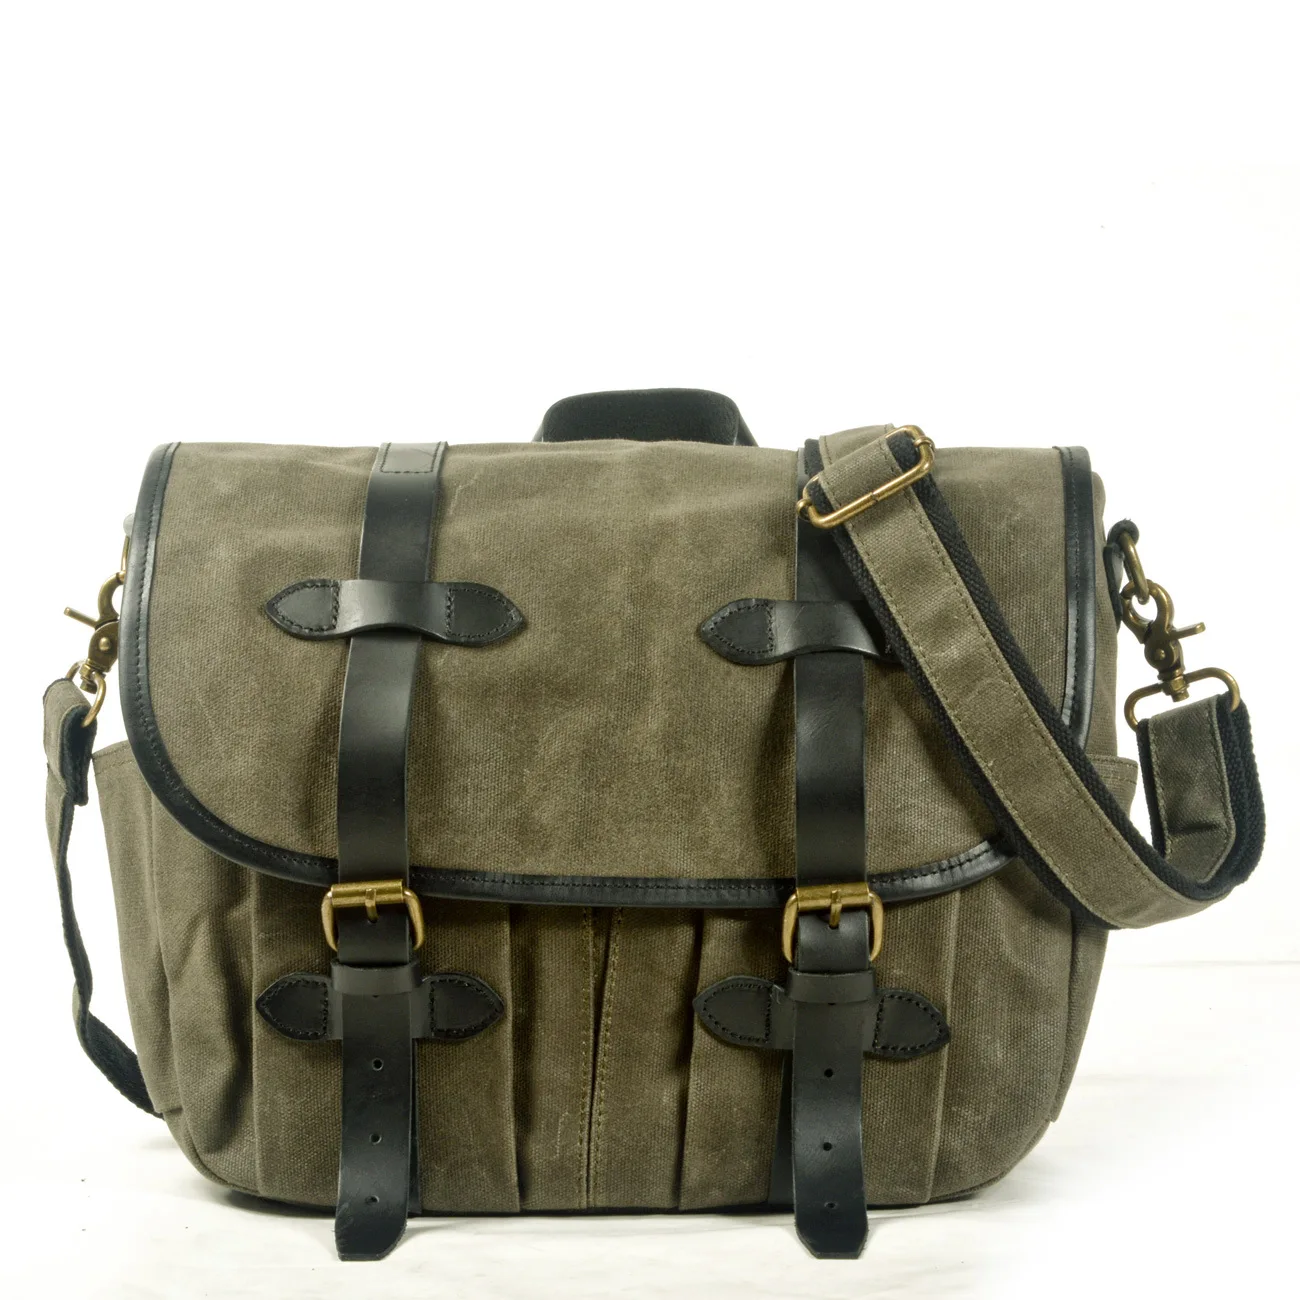 Retro canvas messenger bag men's motorcycle style shoulder bag men's tooling bag messenger bag canvas stitching leather